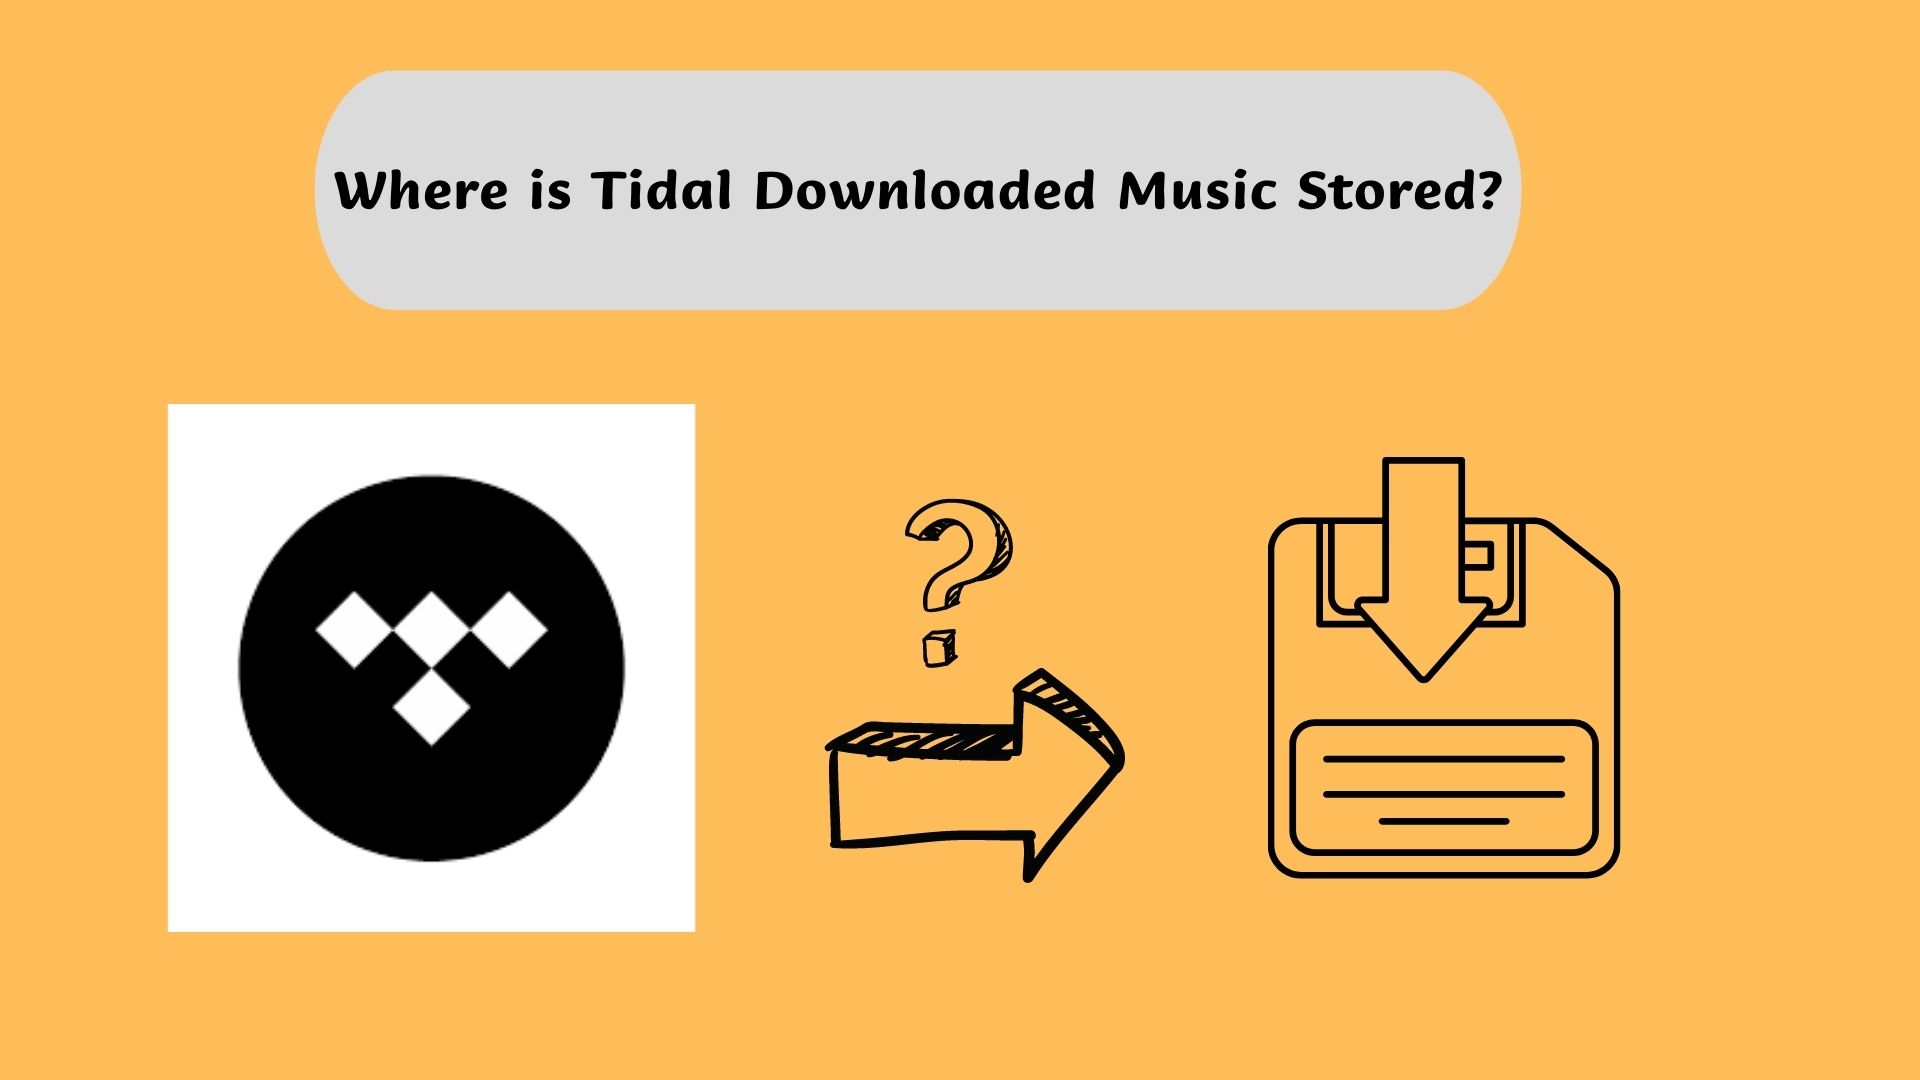 where is tidal downloaded music stored?